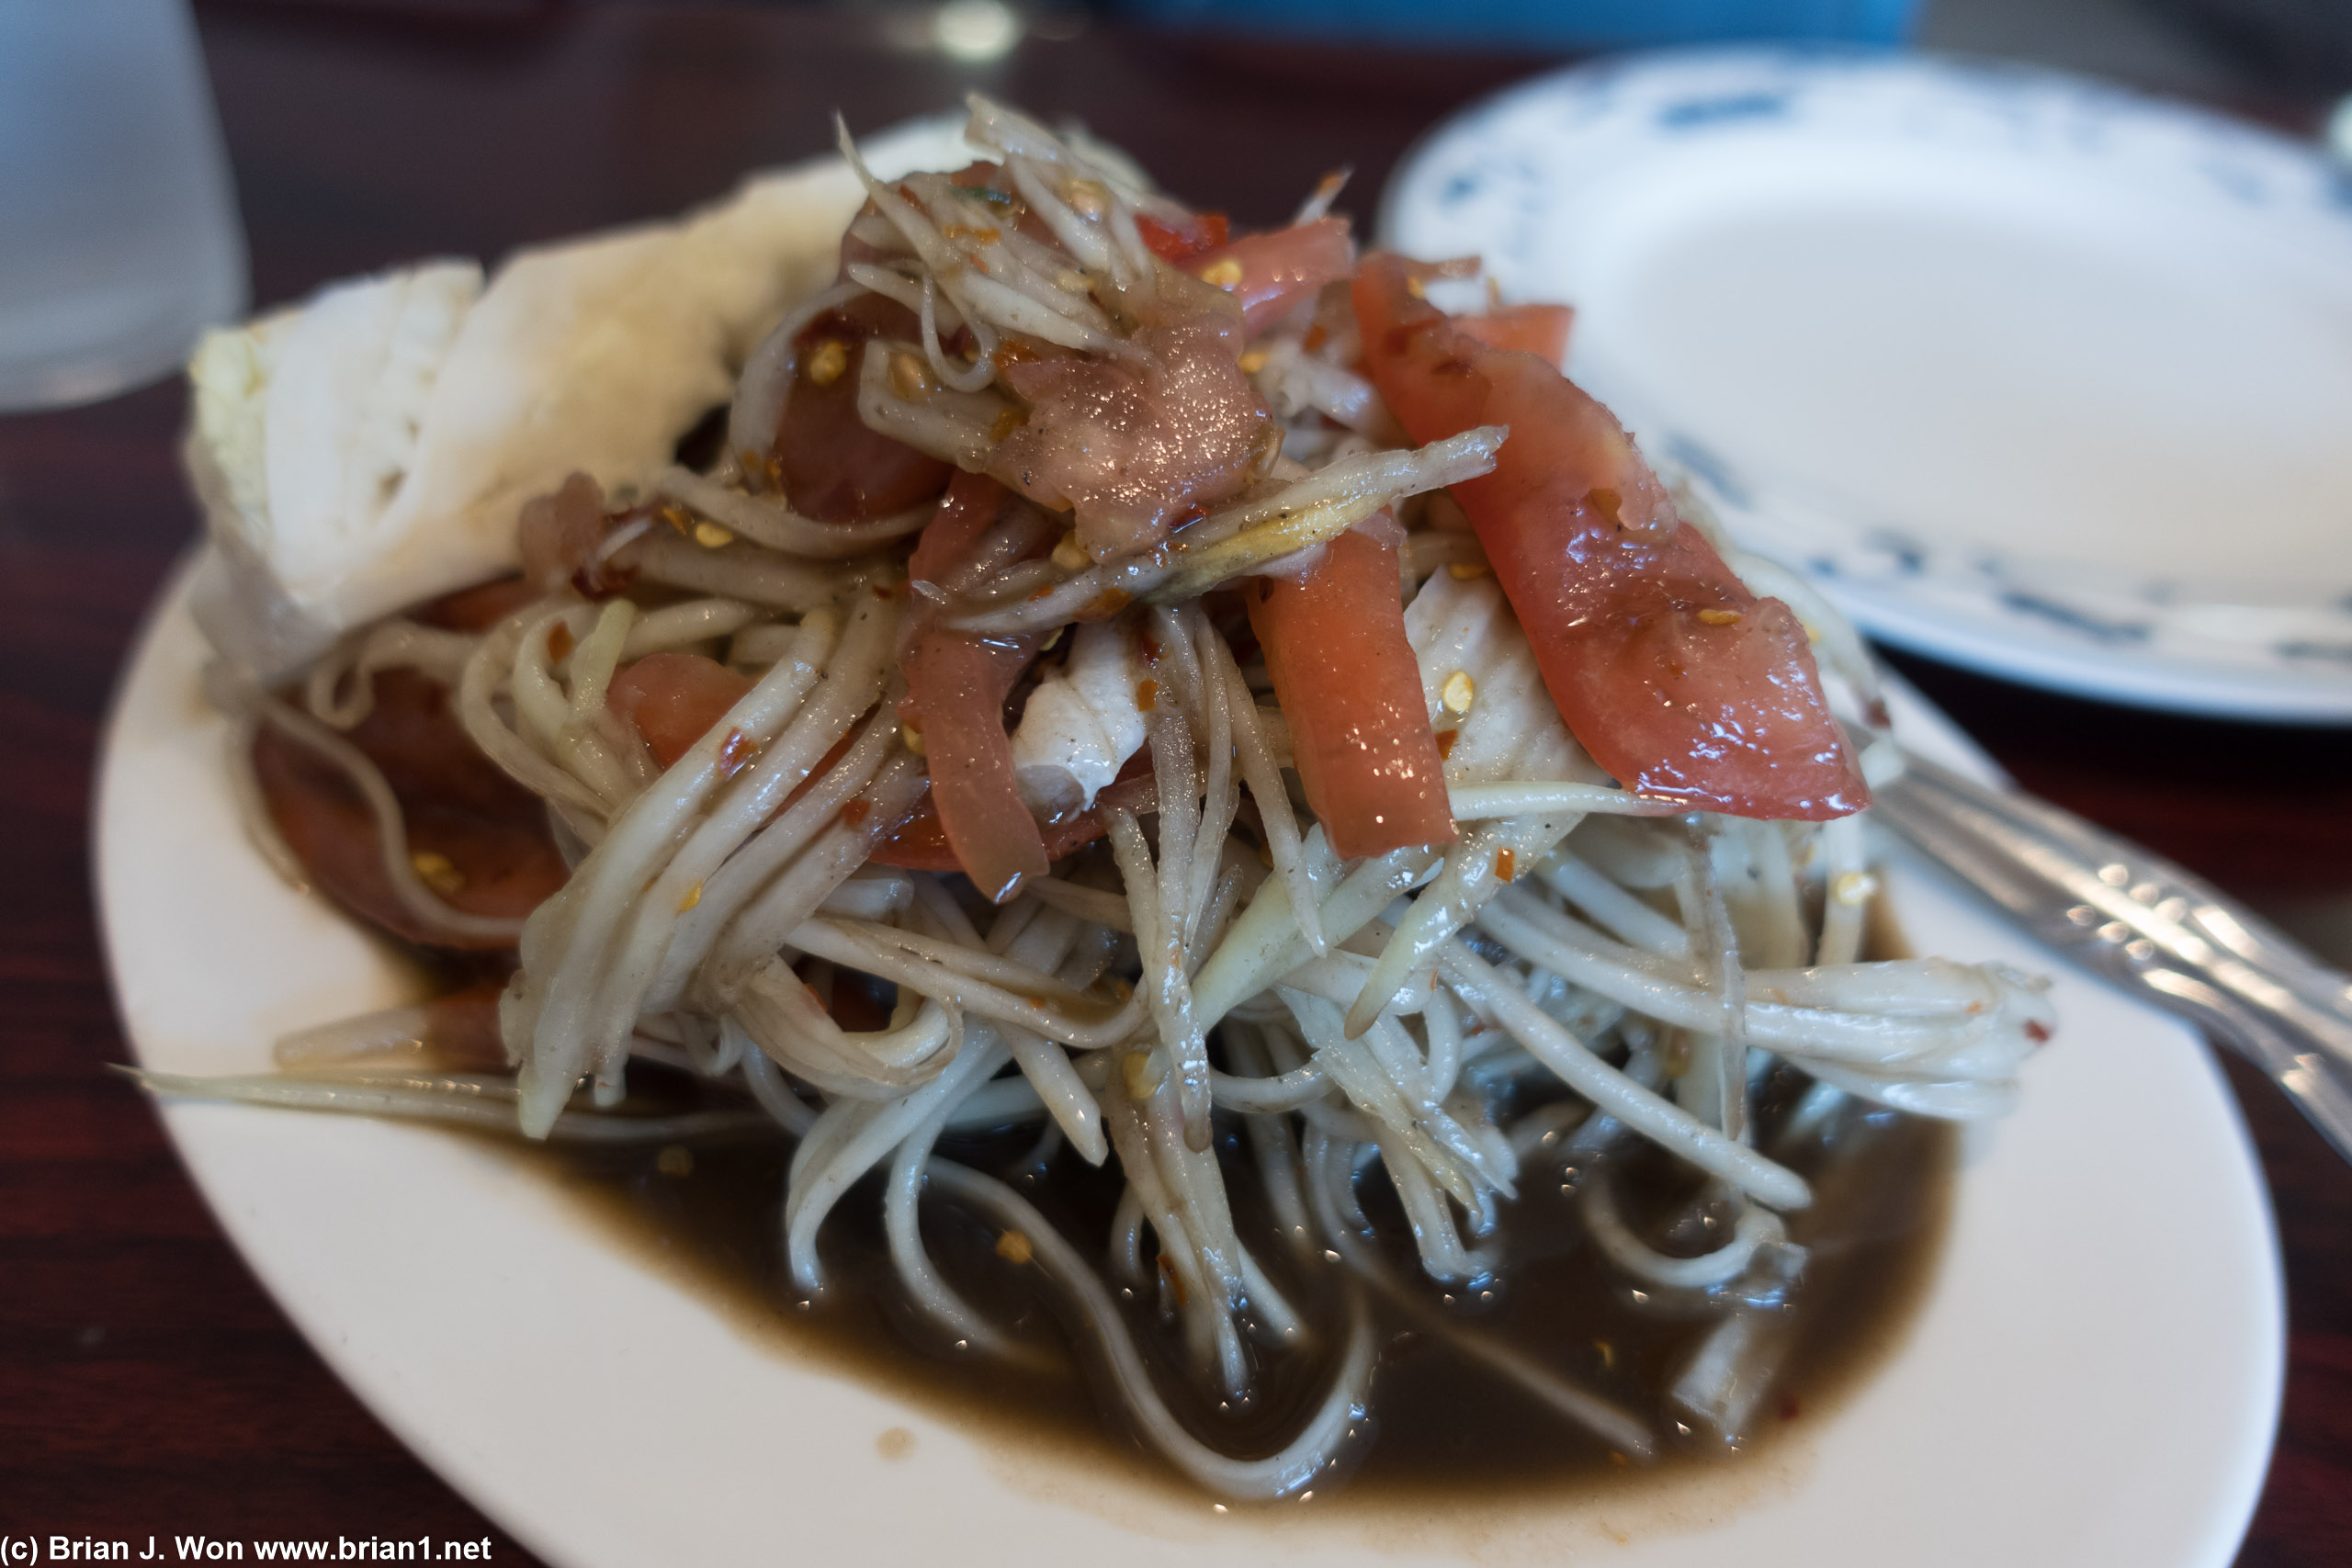 Papaya salad, Lao style with blue crab, was good but not much for color.